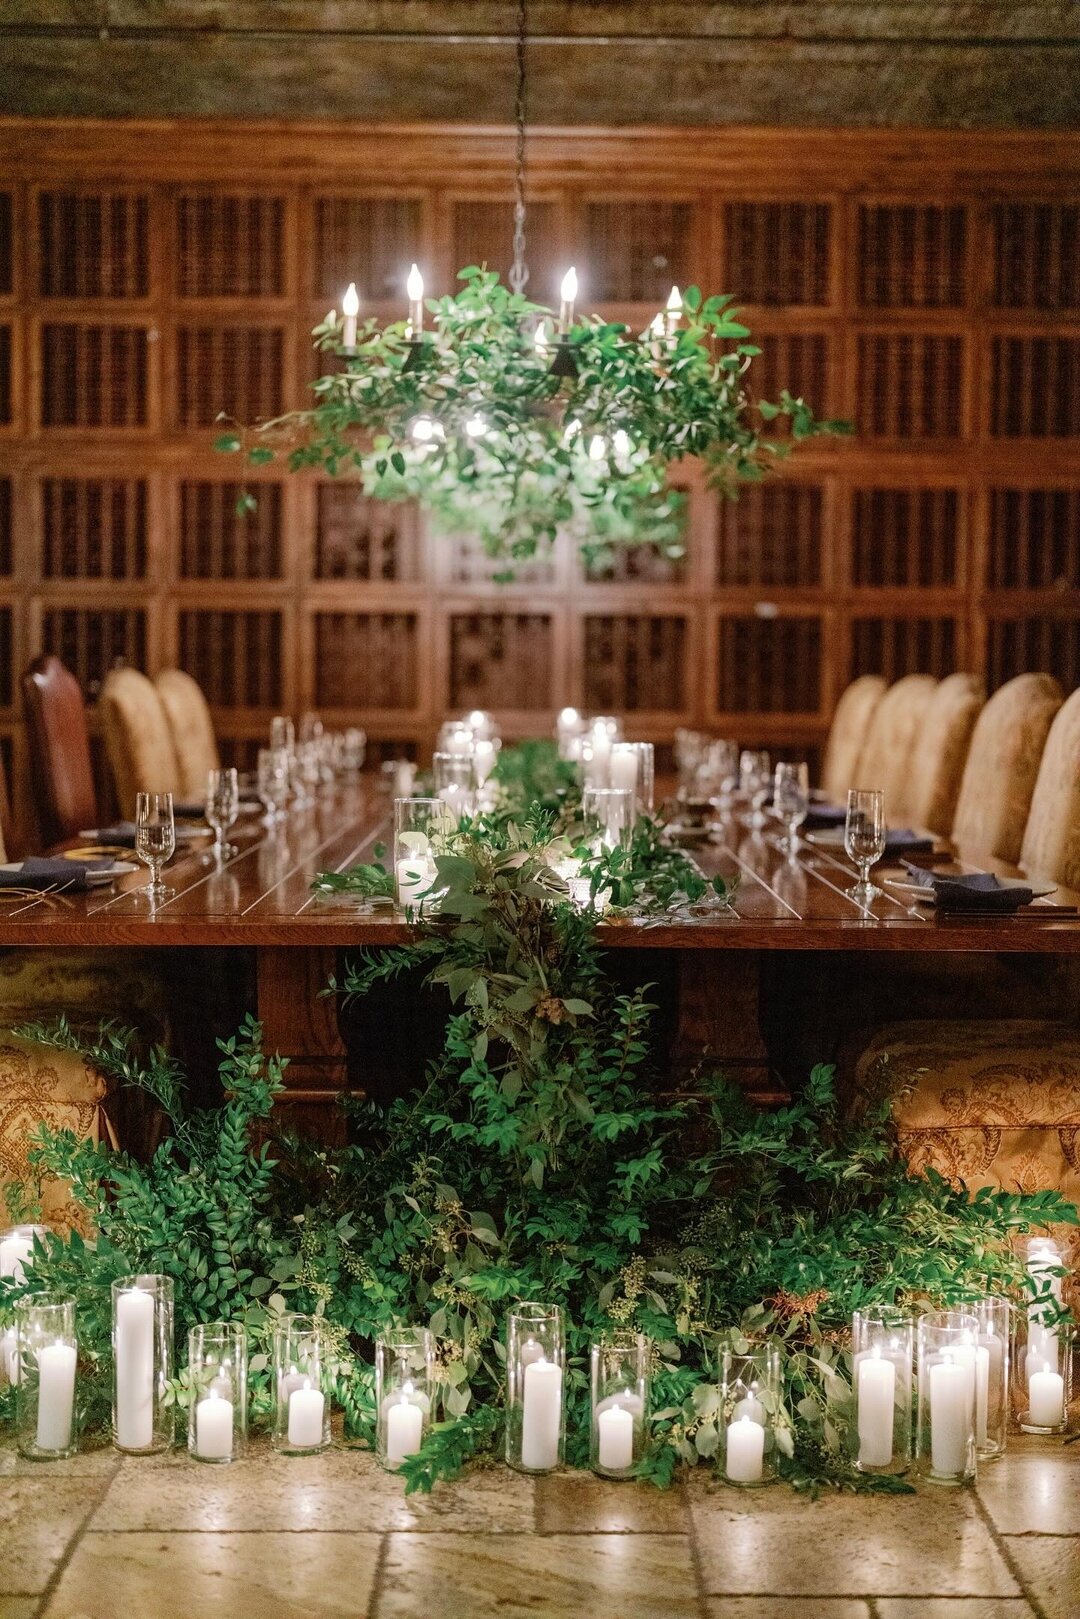 Are you a nature loving girly or guy 🌲🌱, but want to keep your wedding indoors? ⁣

We're here to tell you that it is possible to bring the outdoors IN. Yes, we love nature in the PNW, BUT -- nature doesn't always cooperate. We love finding unique i